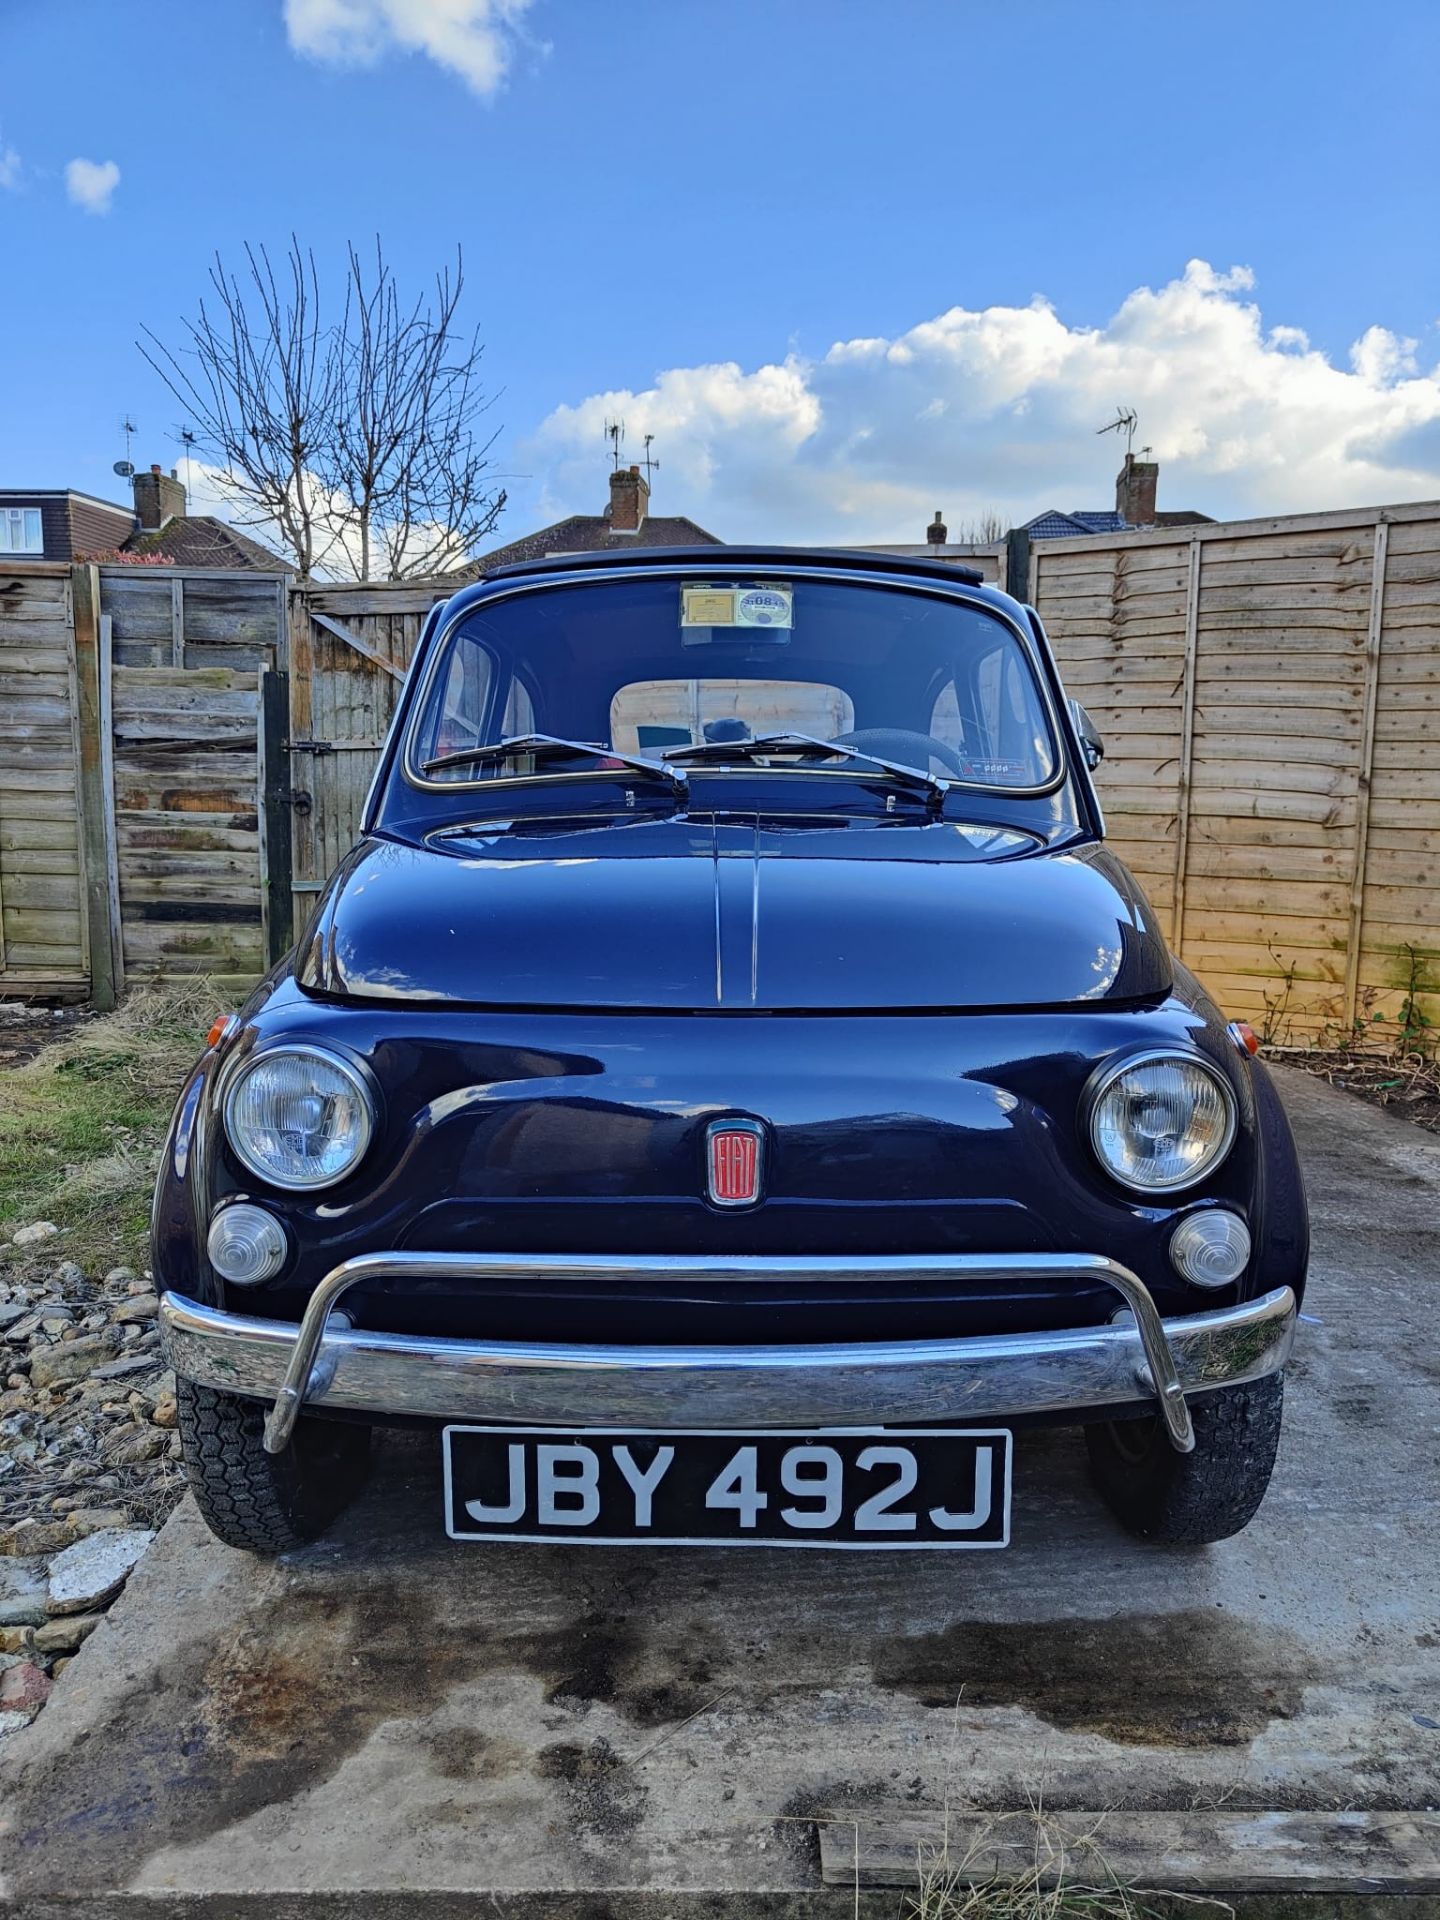 1971 FIAT 500L SALOON Registration Number: JBY 492J Chassis Number: TBA Recorded Mileage: 40,300 - Image 6 of 13